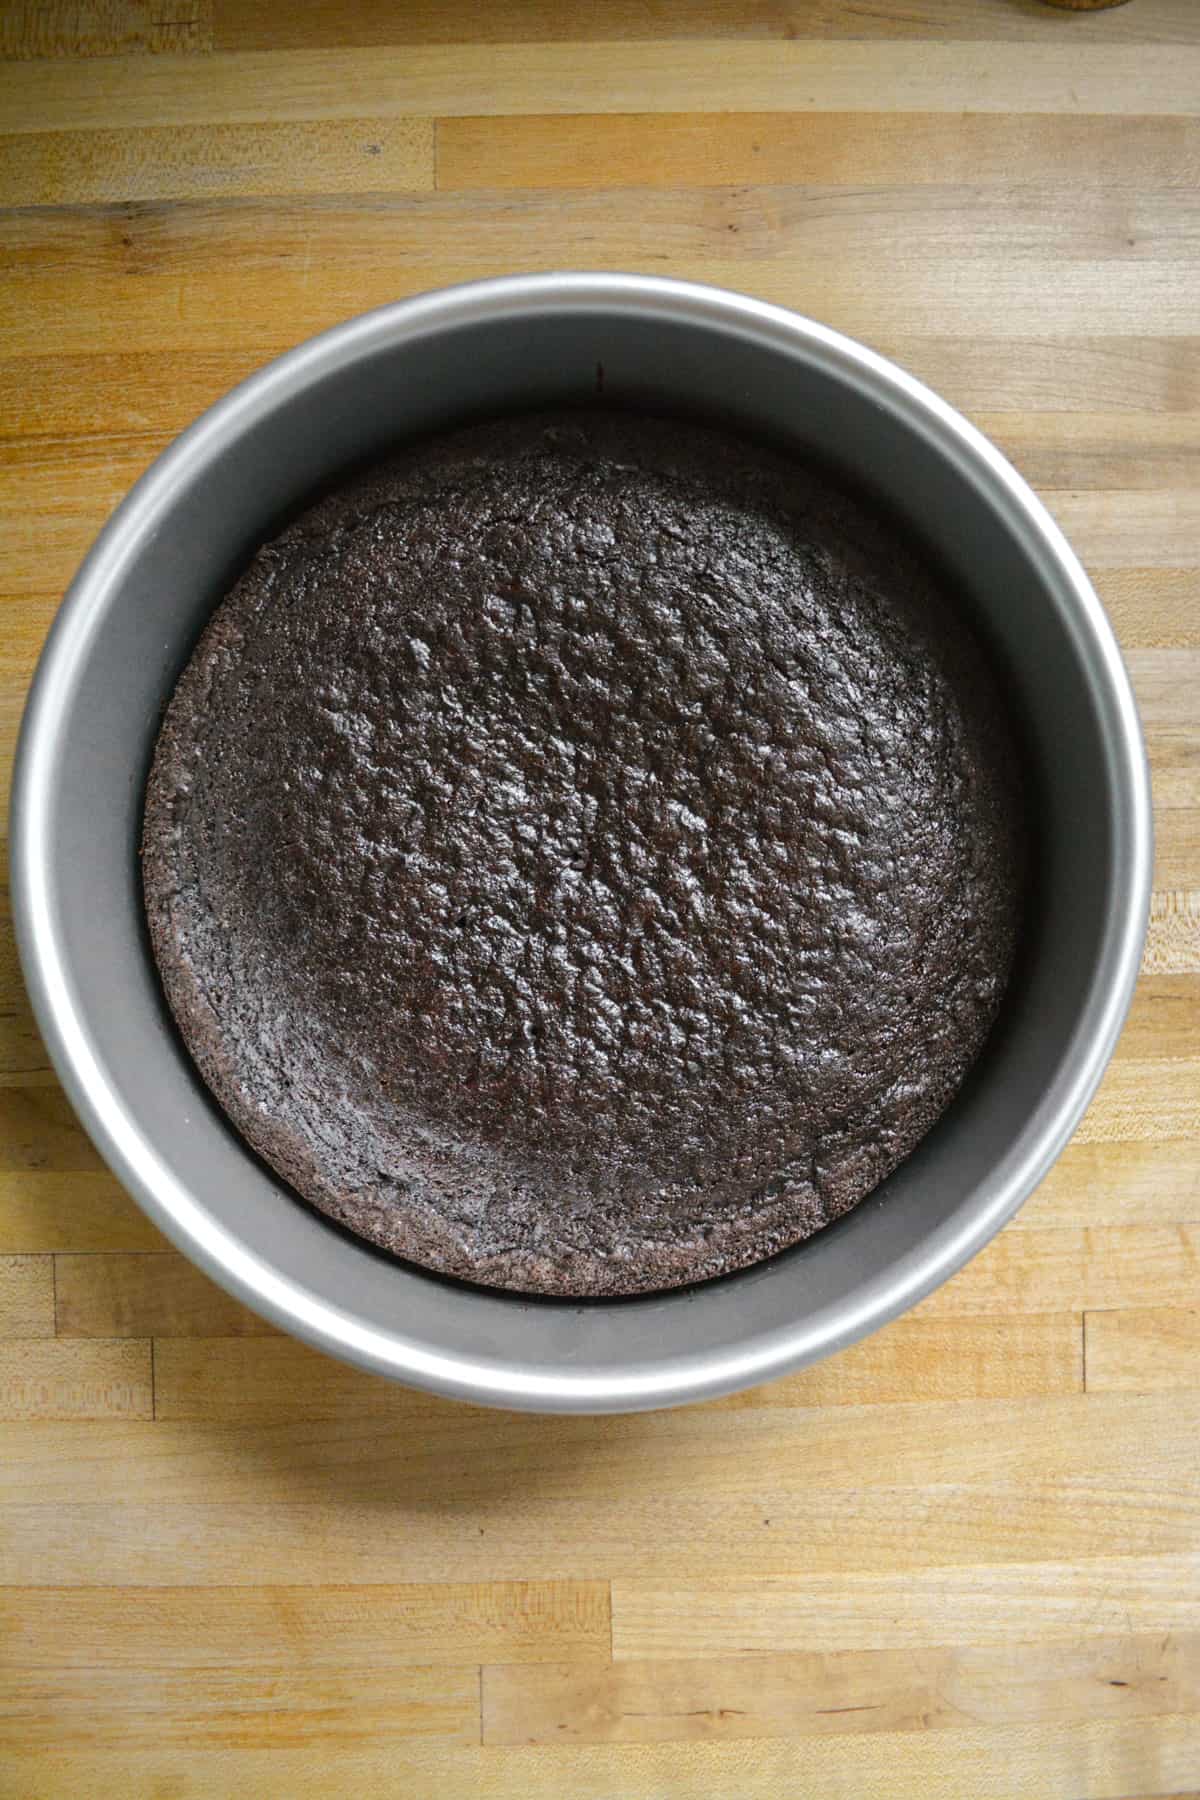 Baked single layer chocolate cake still in its pan.